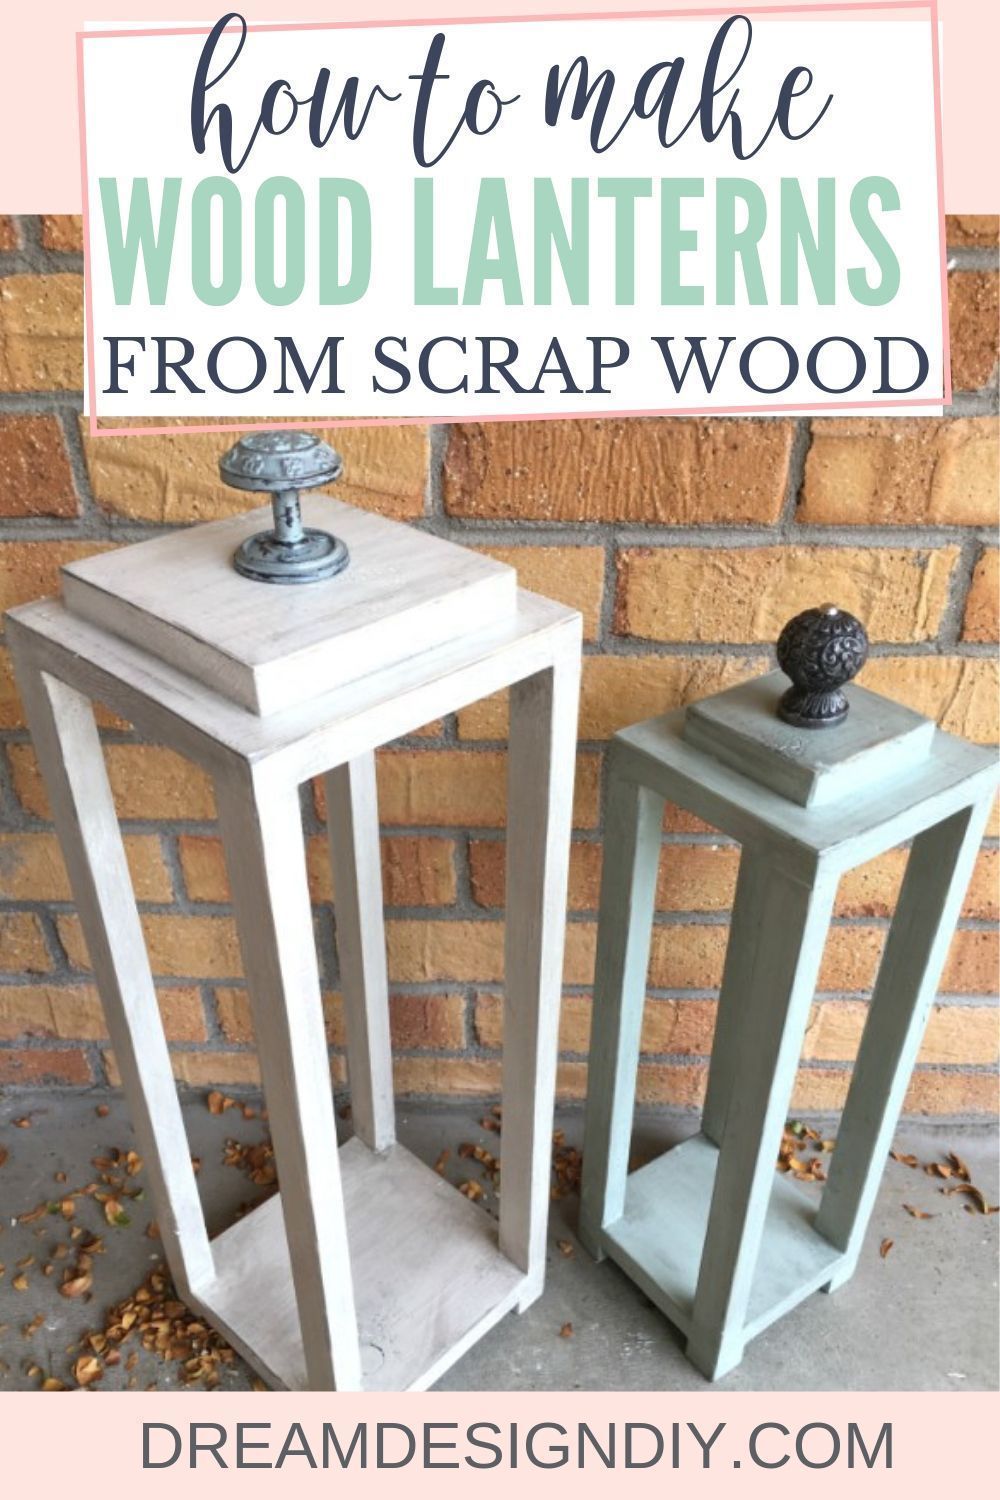 How to Make Wood Lanterns from Scrap Wood - Easy Woodworking Project - How to Make Wood Lanterns from Scrap Wood - Easy Woodworking Project -   19 vintage diy Projects ideas